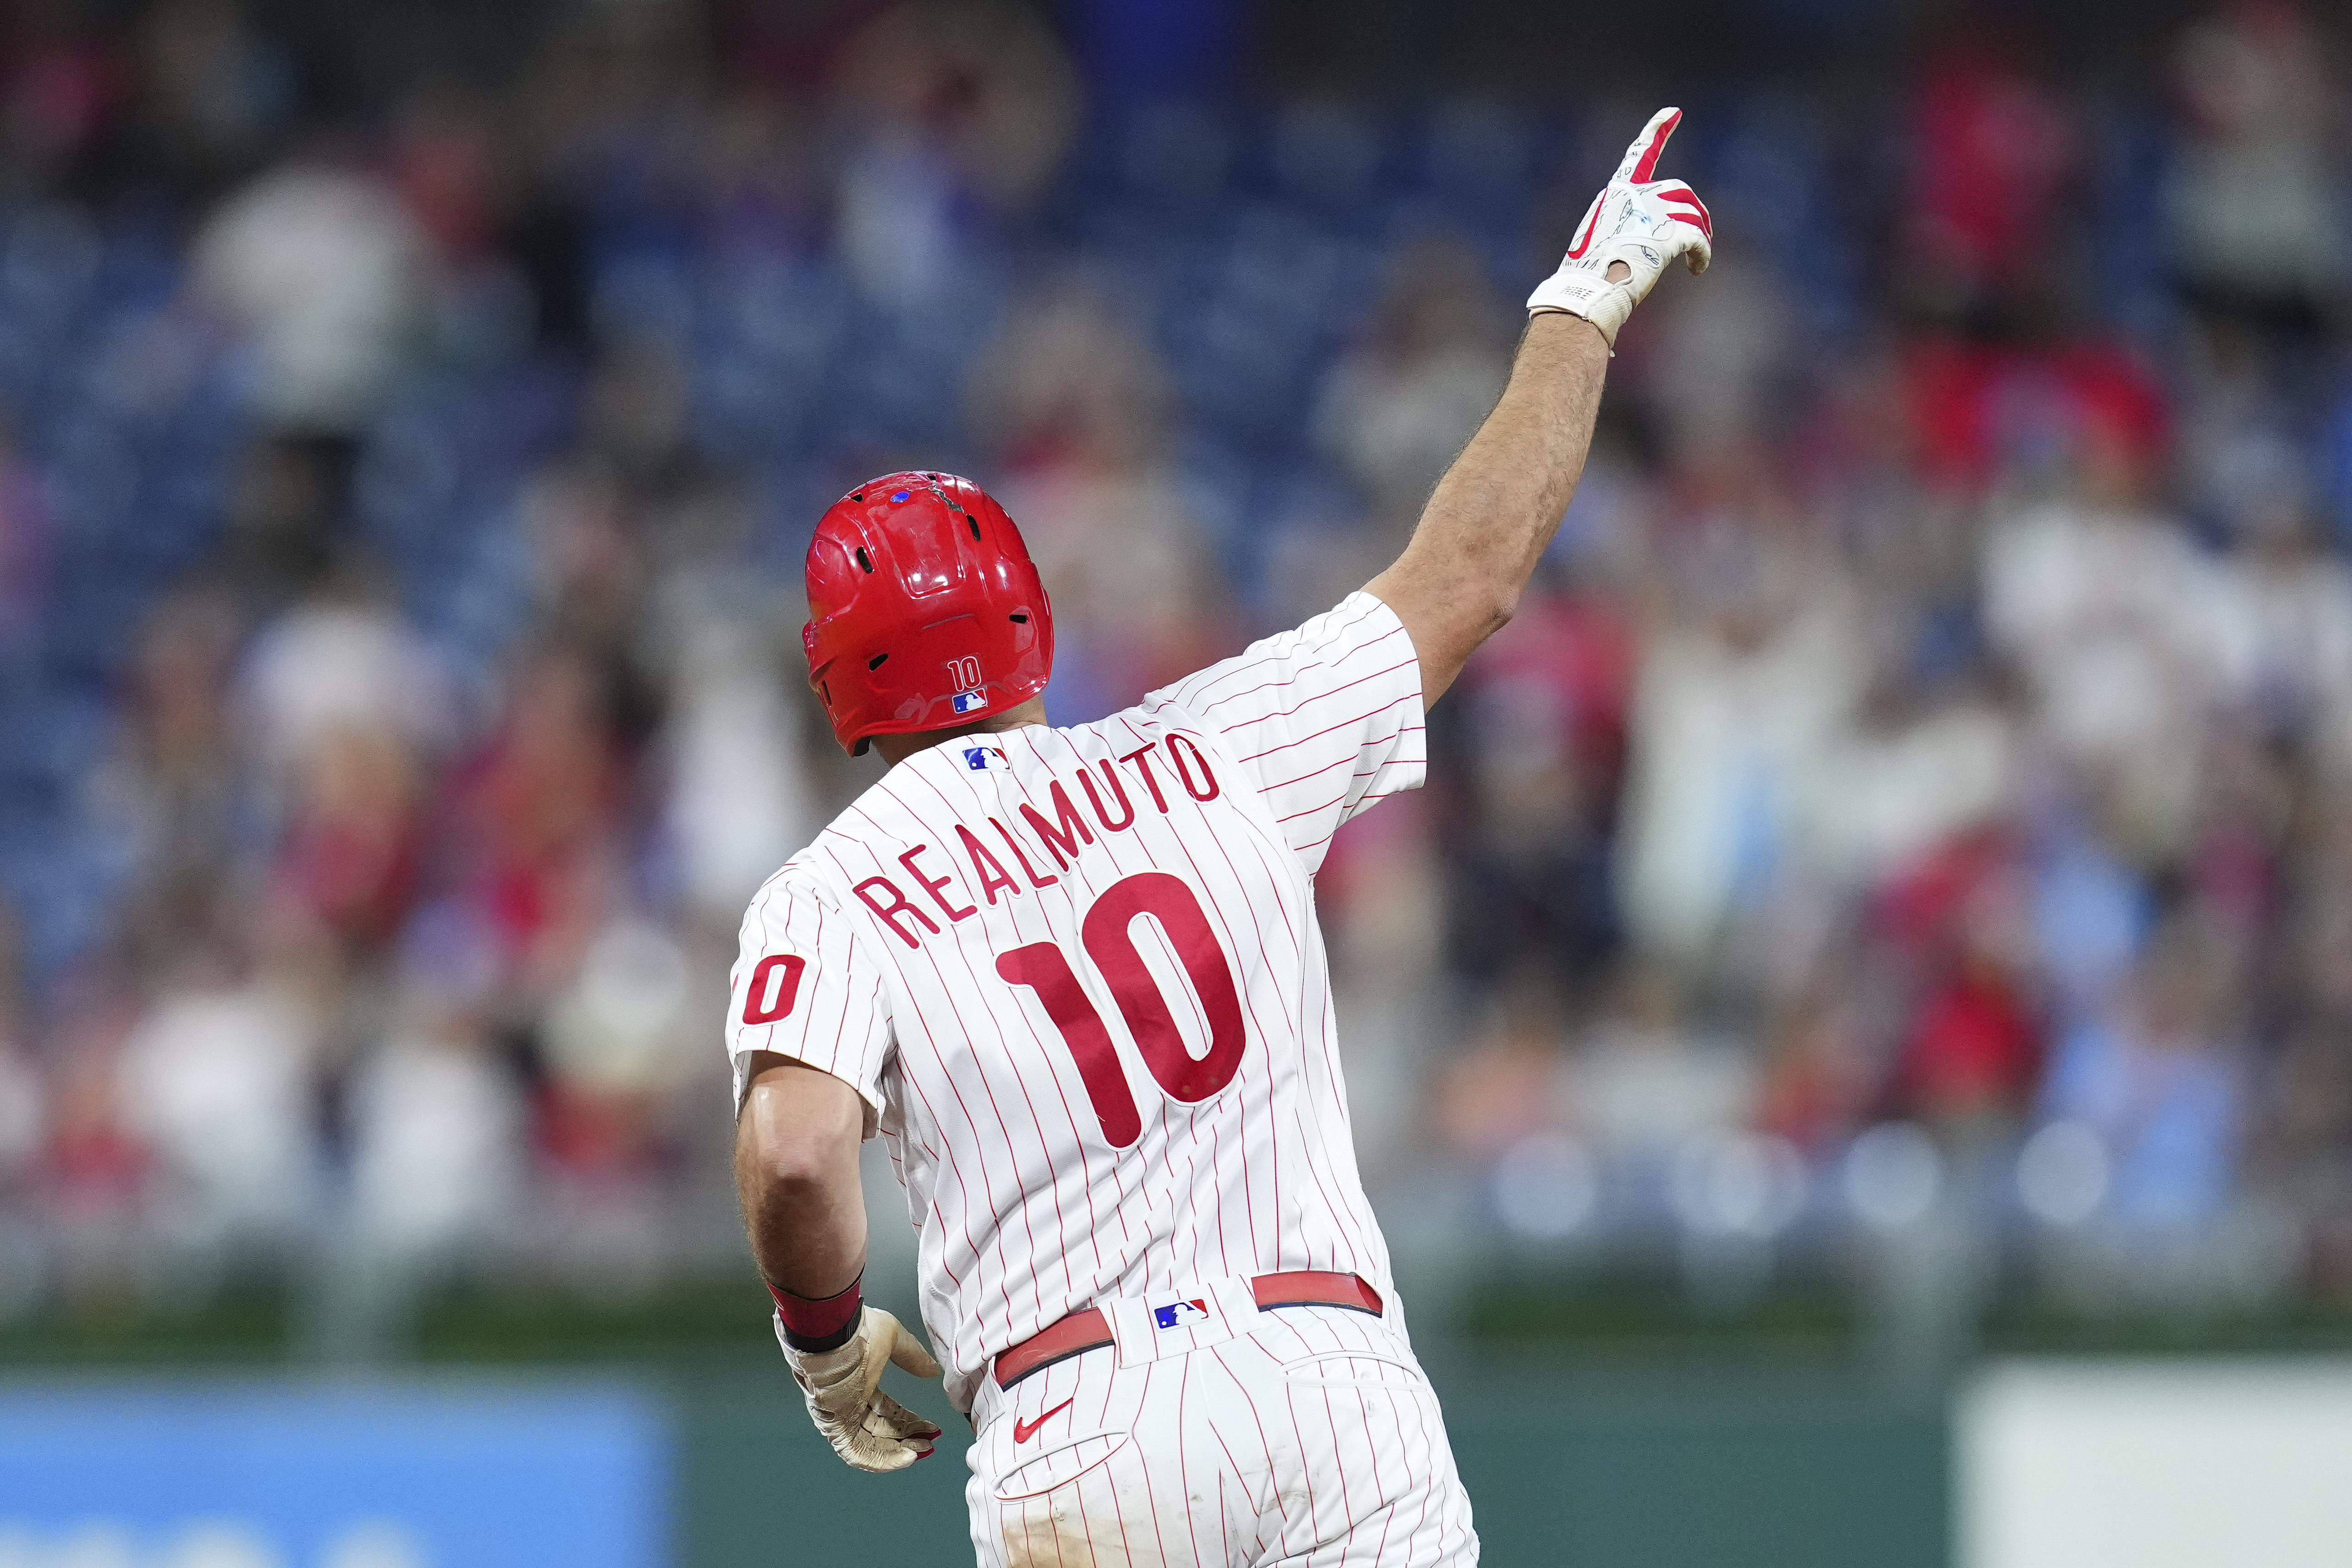 jt realmuto number